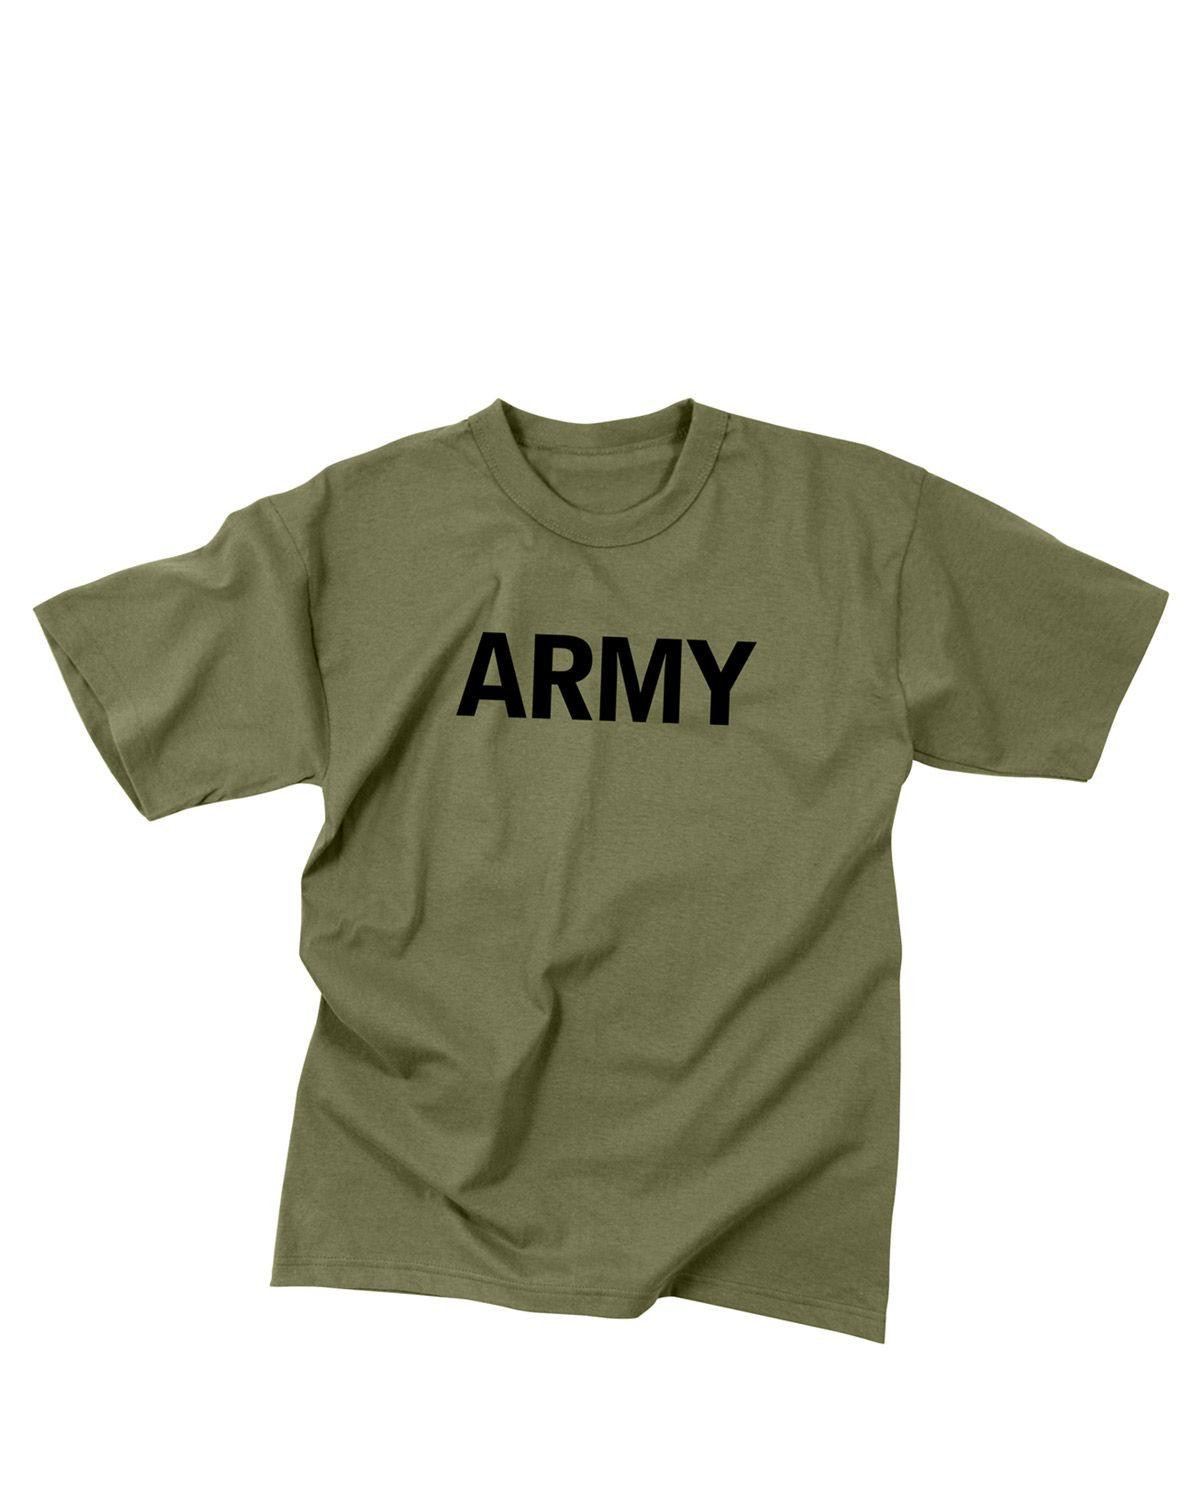 Rothco Physical Training T-shirt (Oliven m. ARMY, XL)